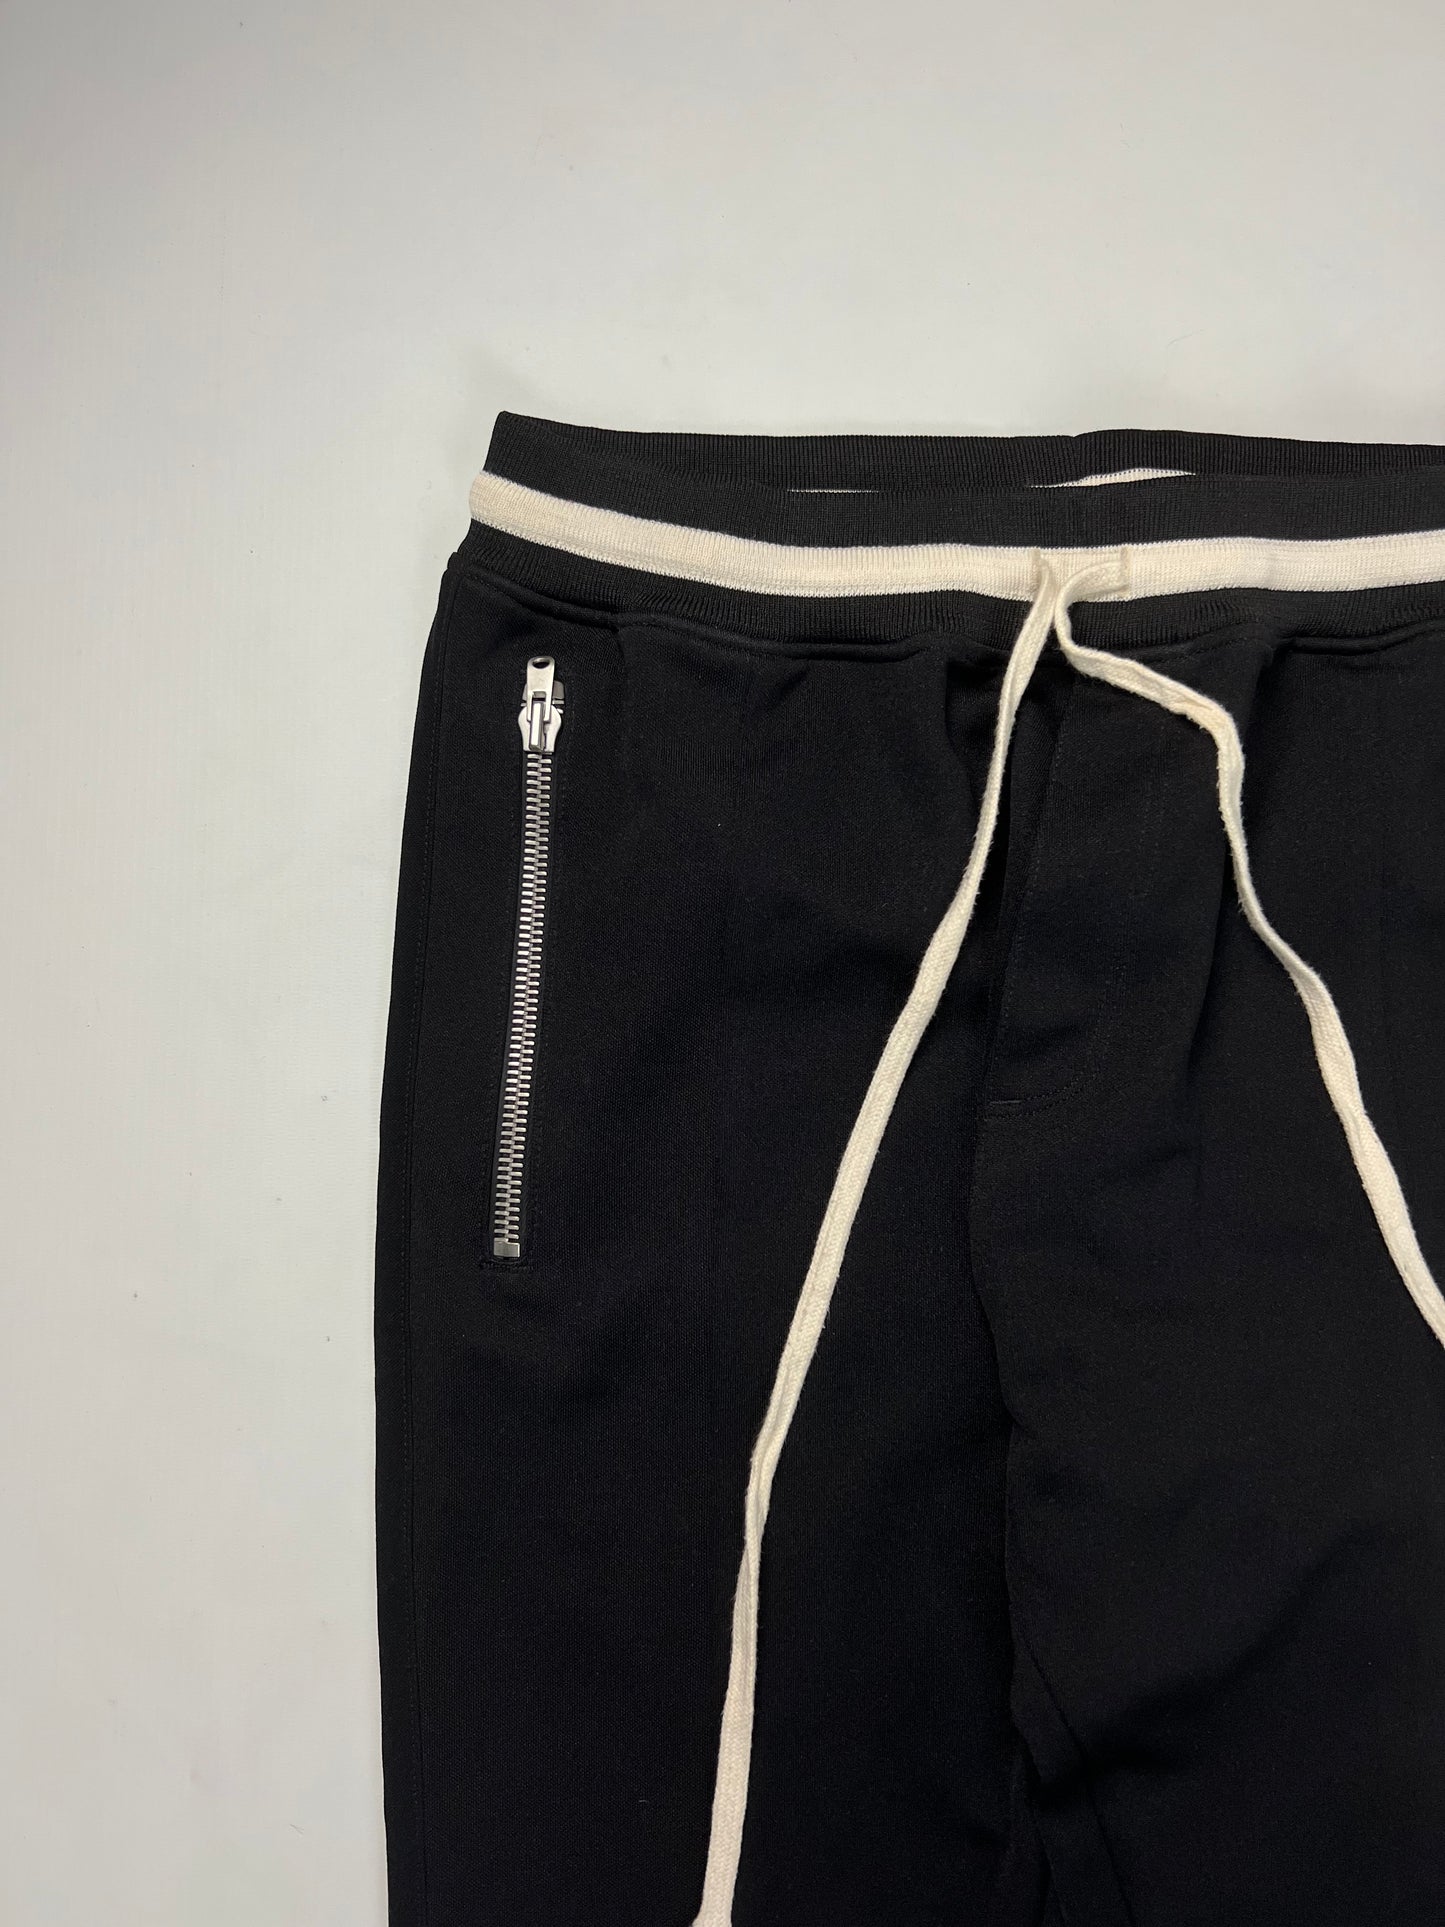 Fear of God 5TH COLLECTION TRACKPANTS SZ:L